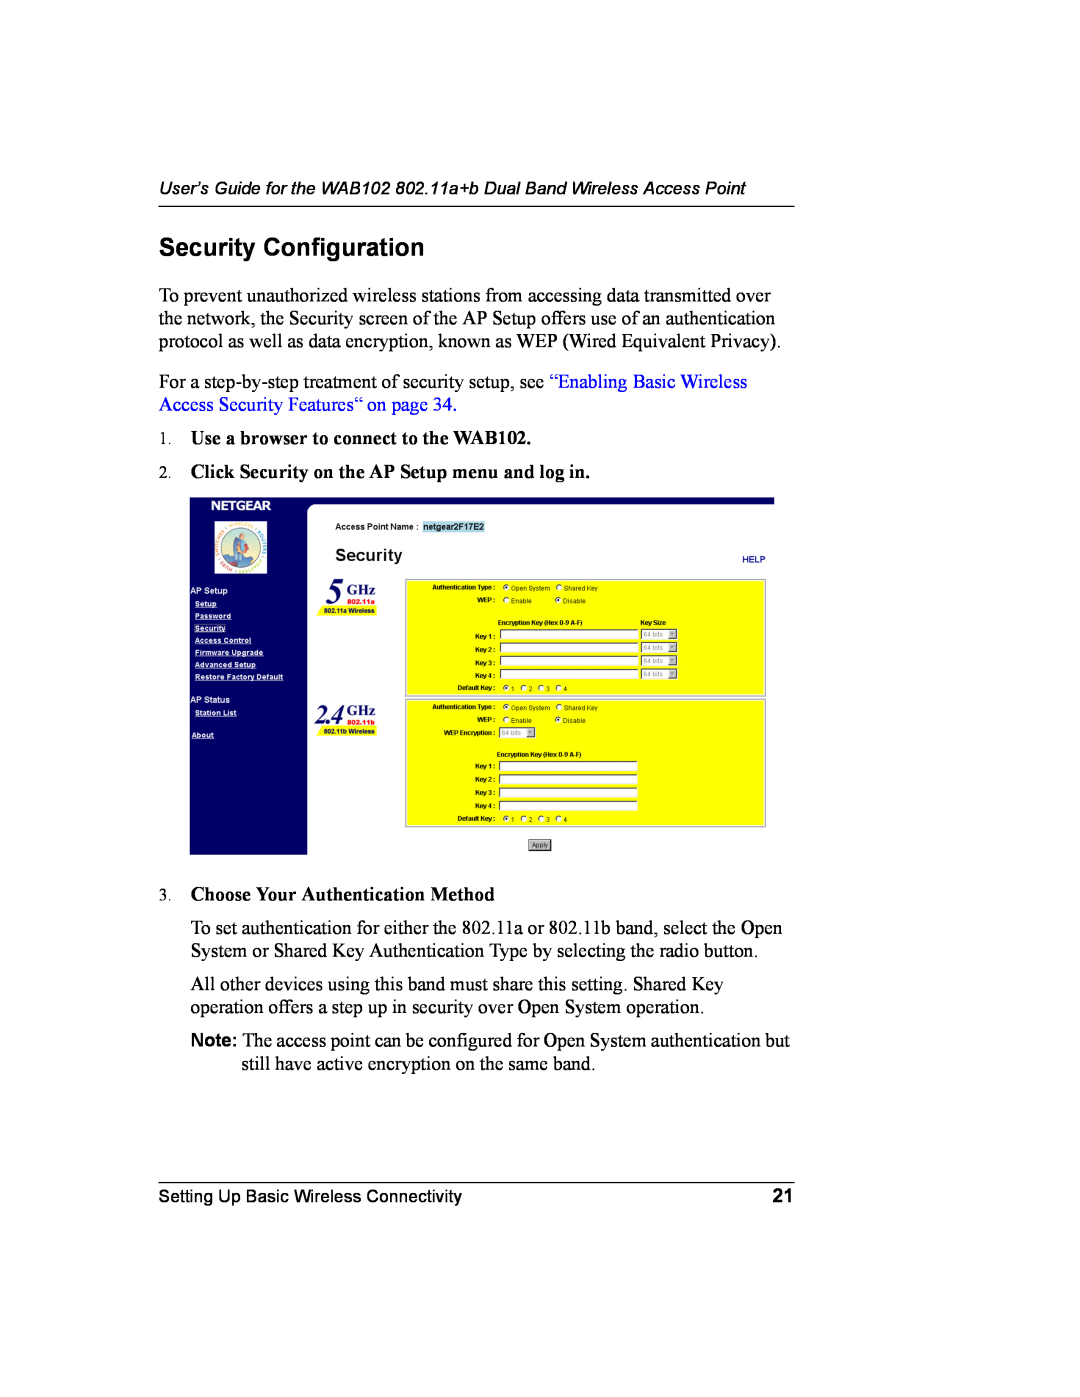 NETGEAR Security Configuration, Use a browser to connect to the WAB102, Click Security on the AP Setup menu and log in 